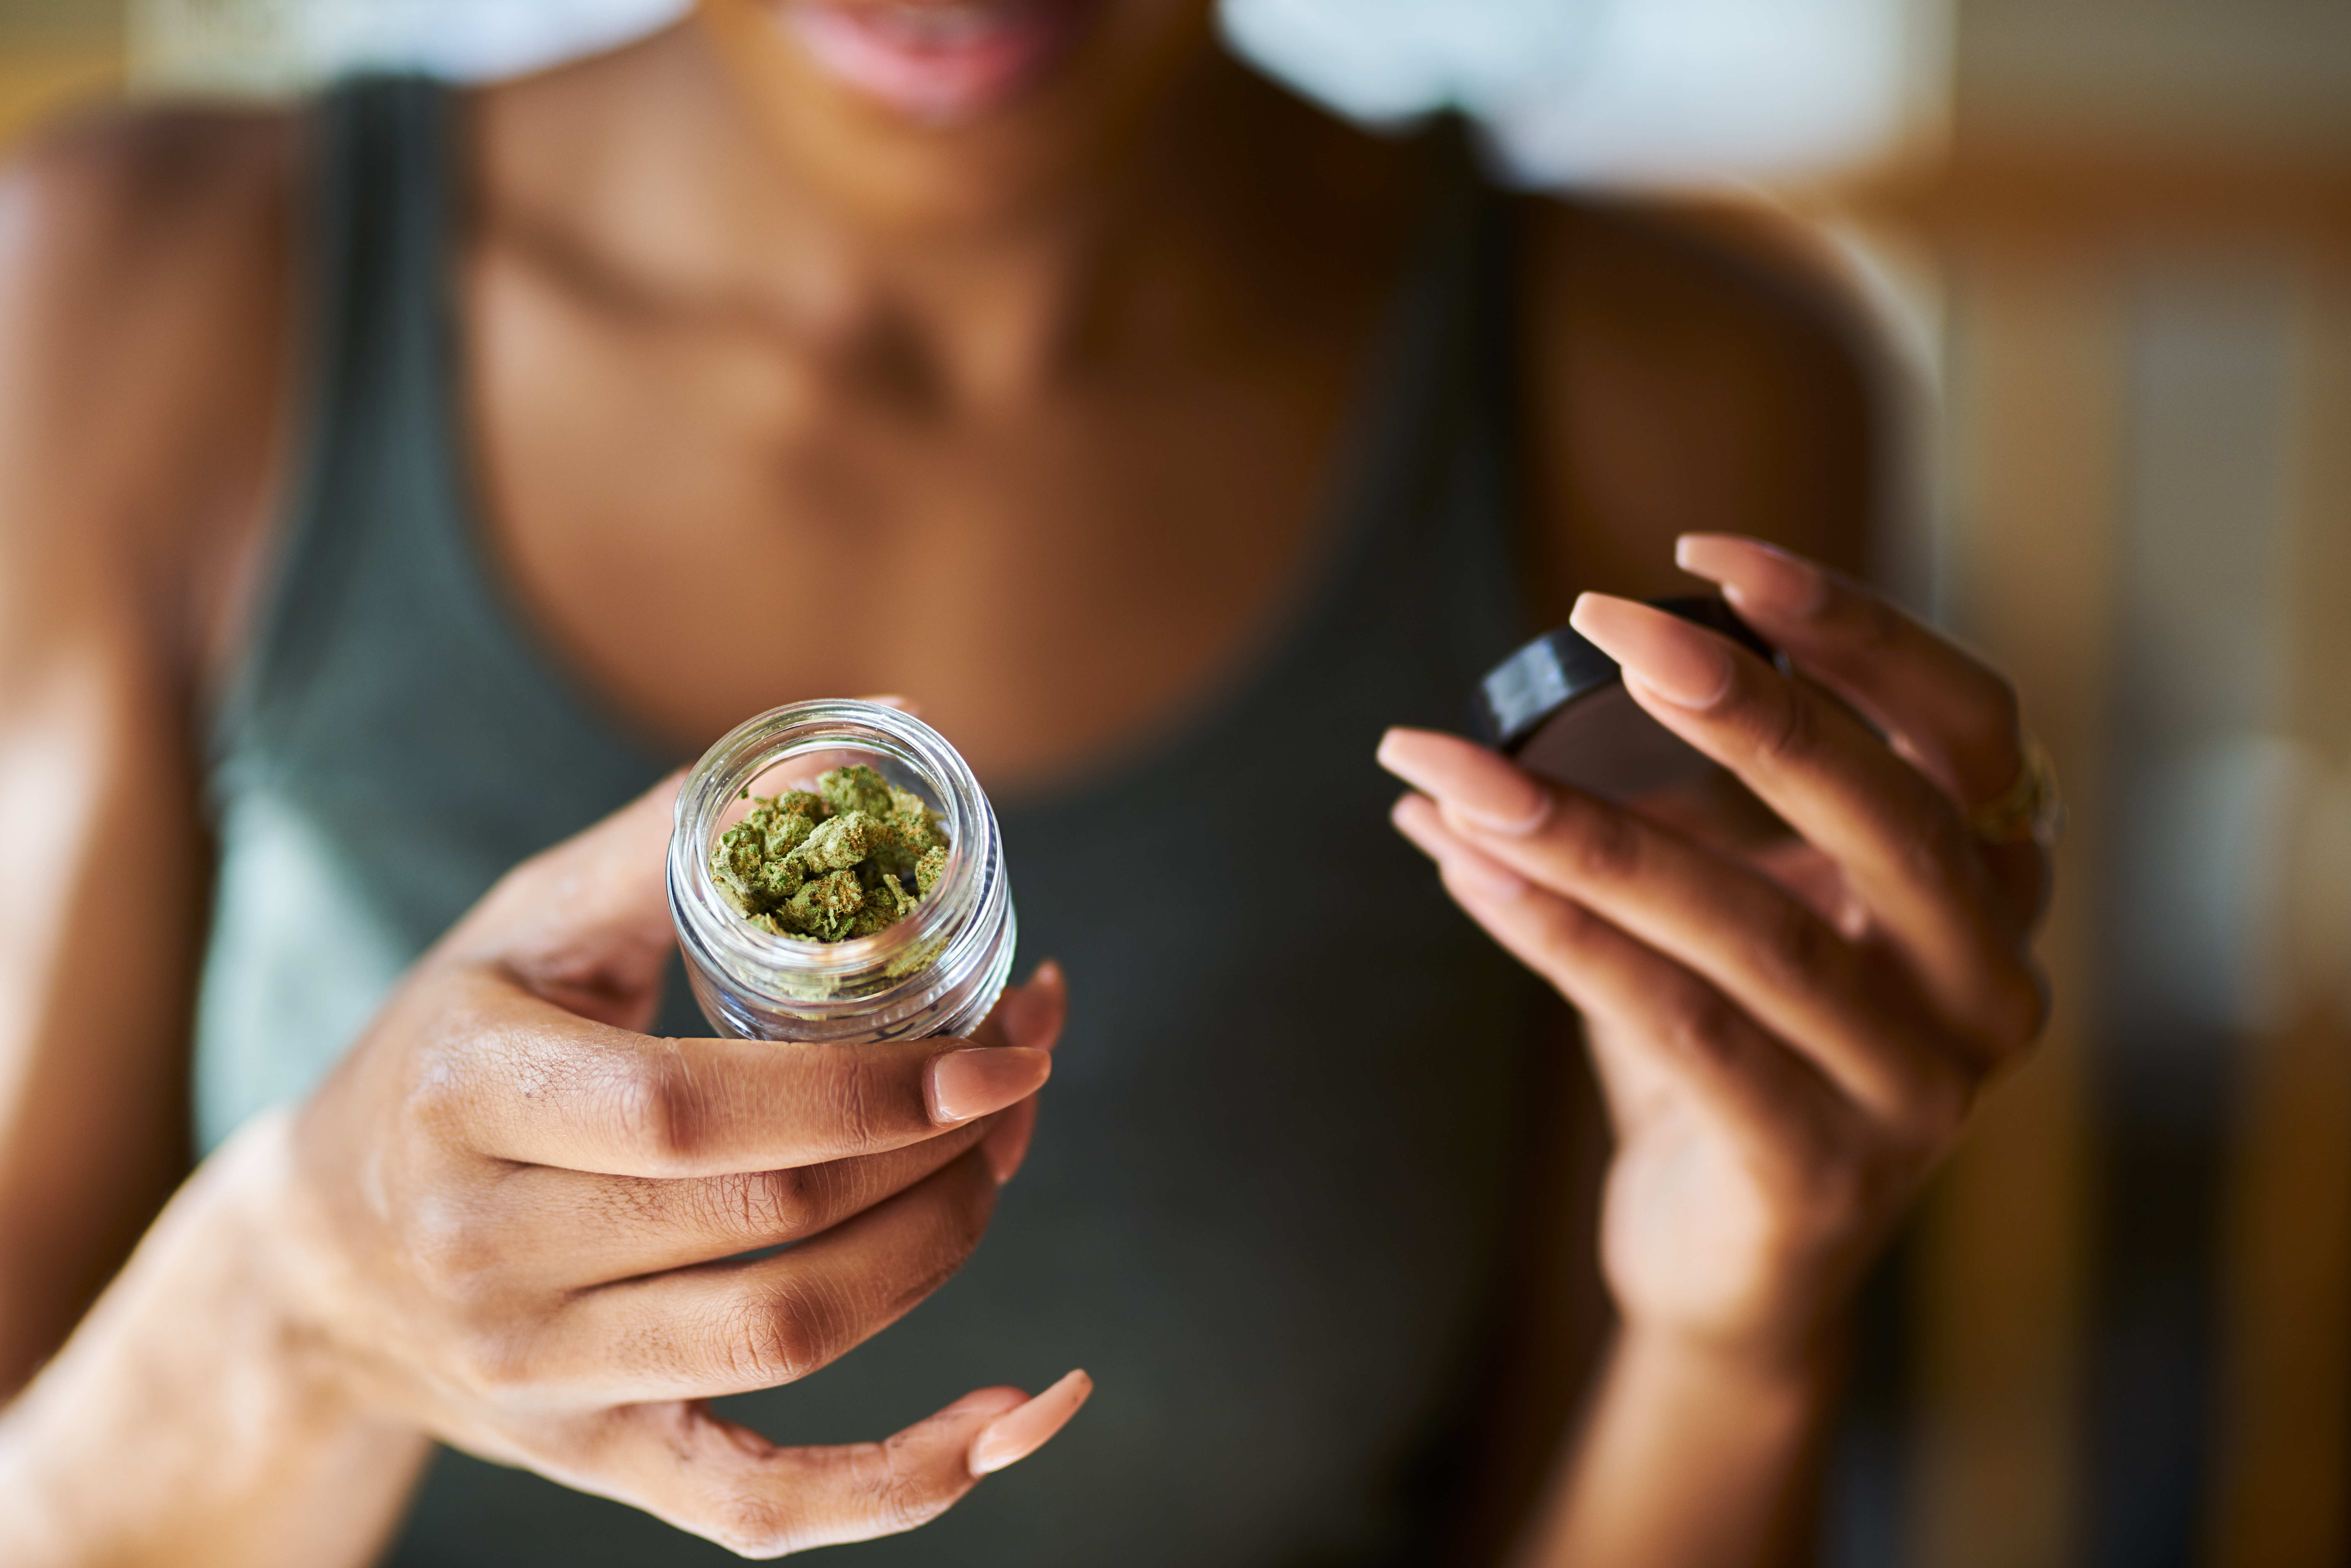 moms and cannabis